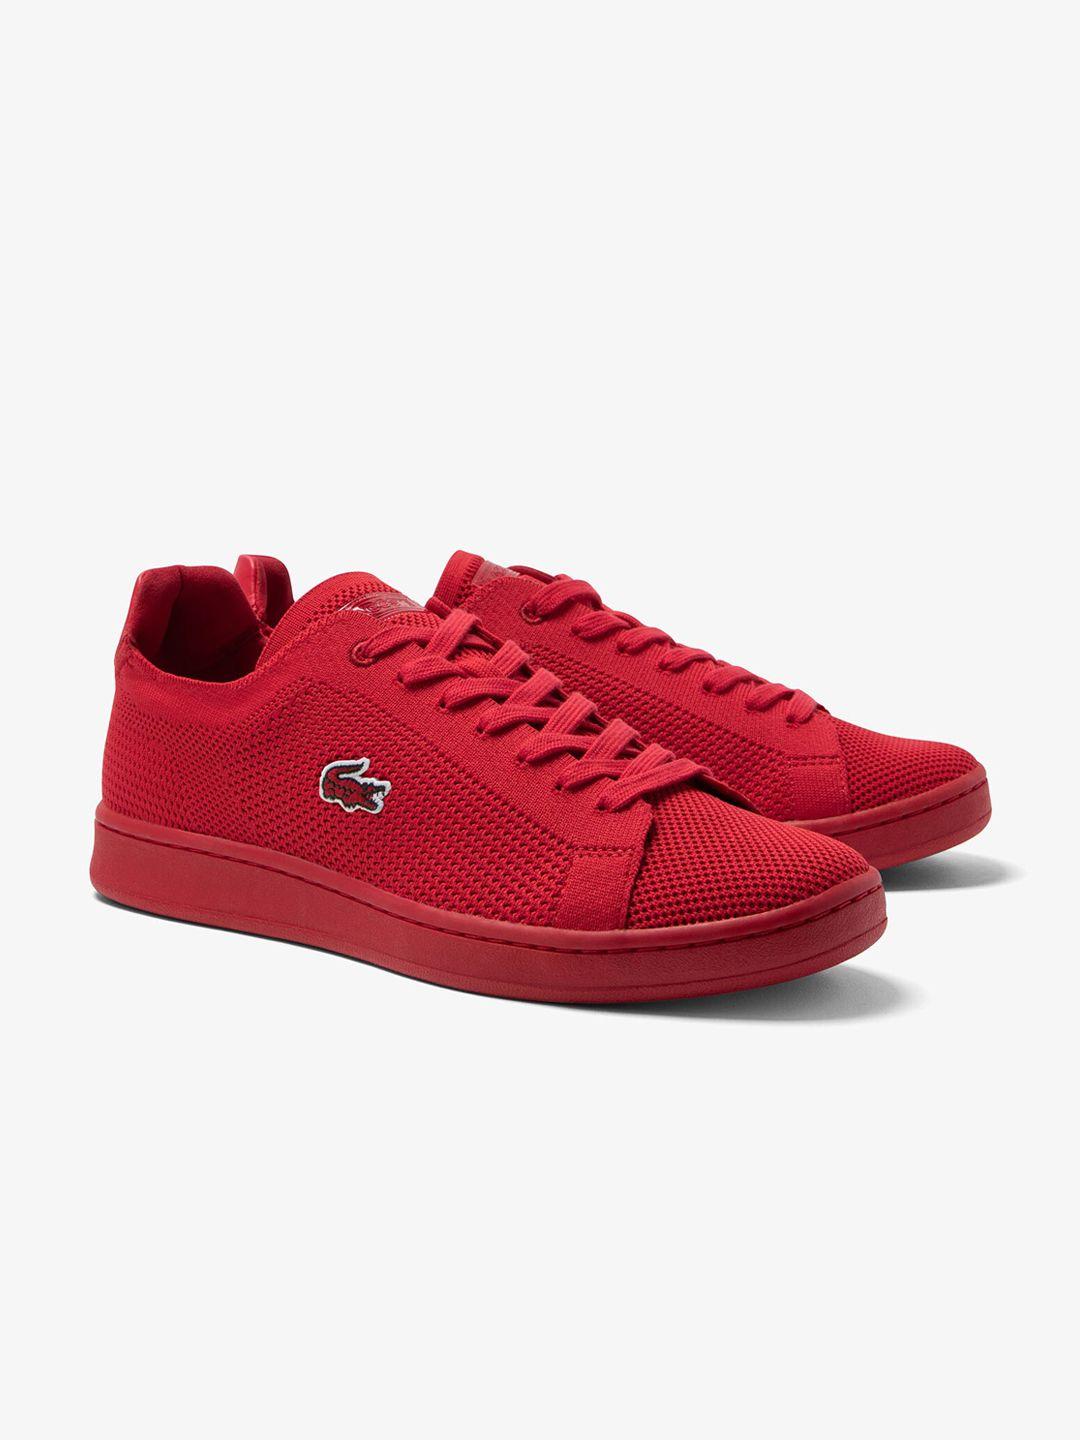 lacoste men red training or gym non-marking shoes